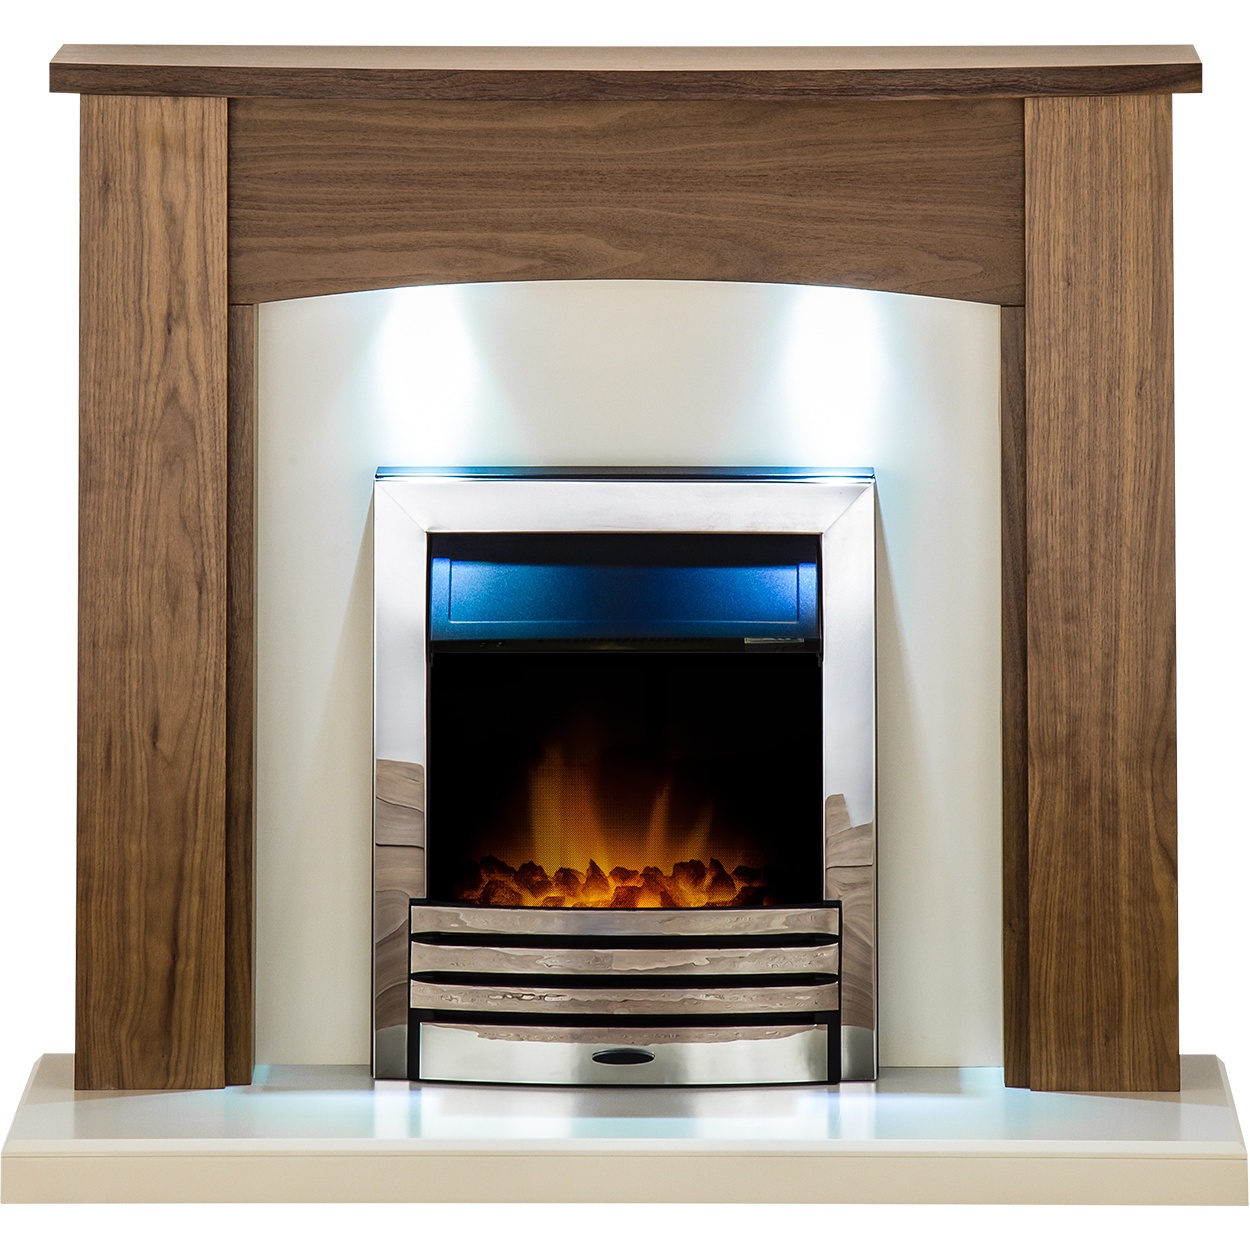 Cheap Electric Fireplace Fresh Details About Adam Fireplace Suite Walnut & Eclipse Electric Fire Chrome and Downlights 48"